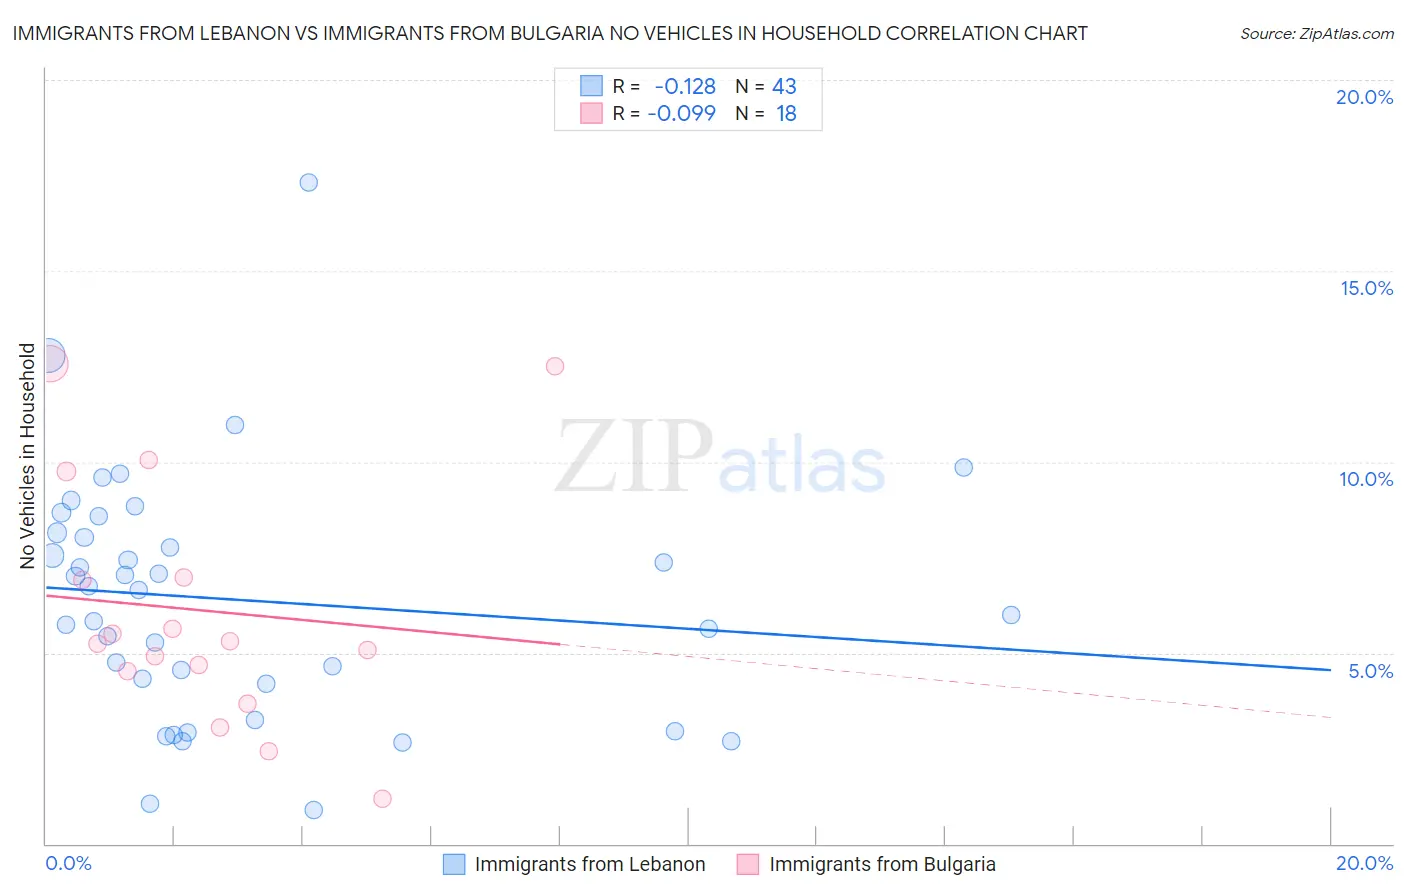 Immigrants from Lebanon vs Immigrants from Bulgaria No Vehicles in Household